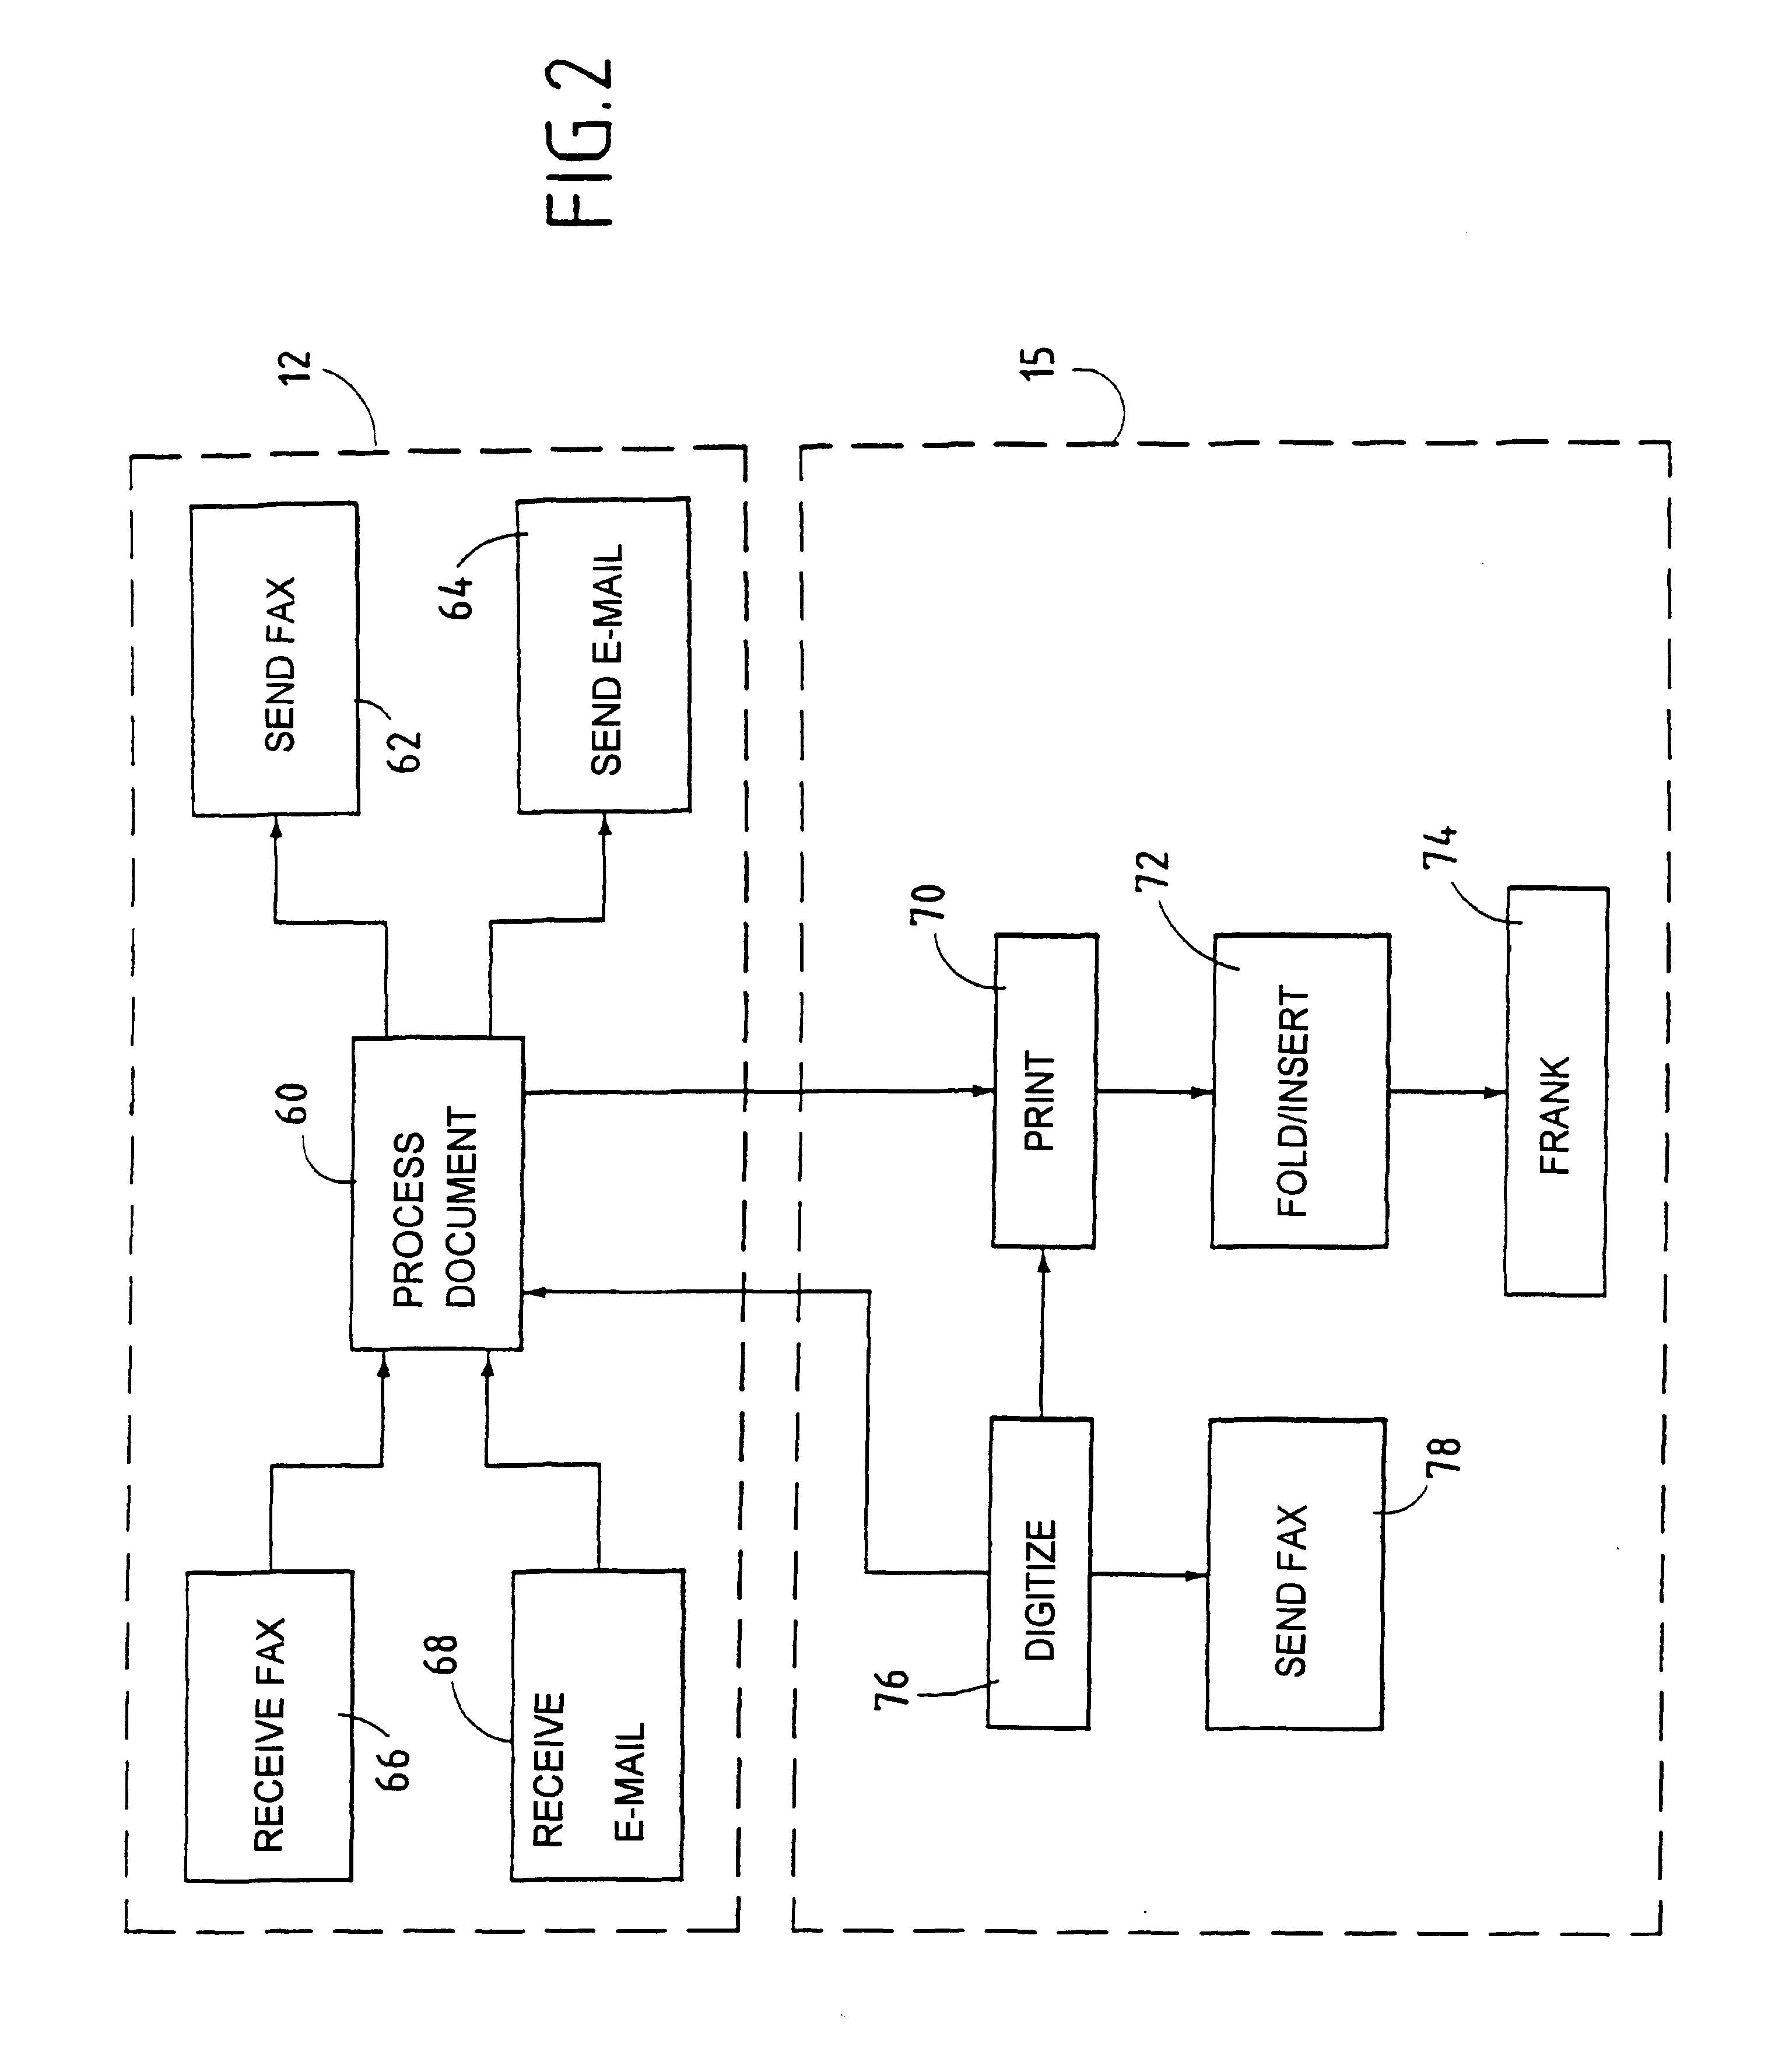 Self-contained multi-function system for preparing mail